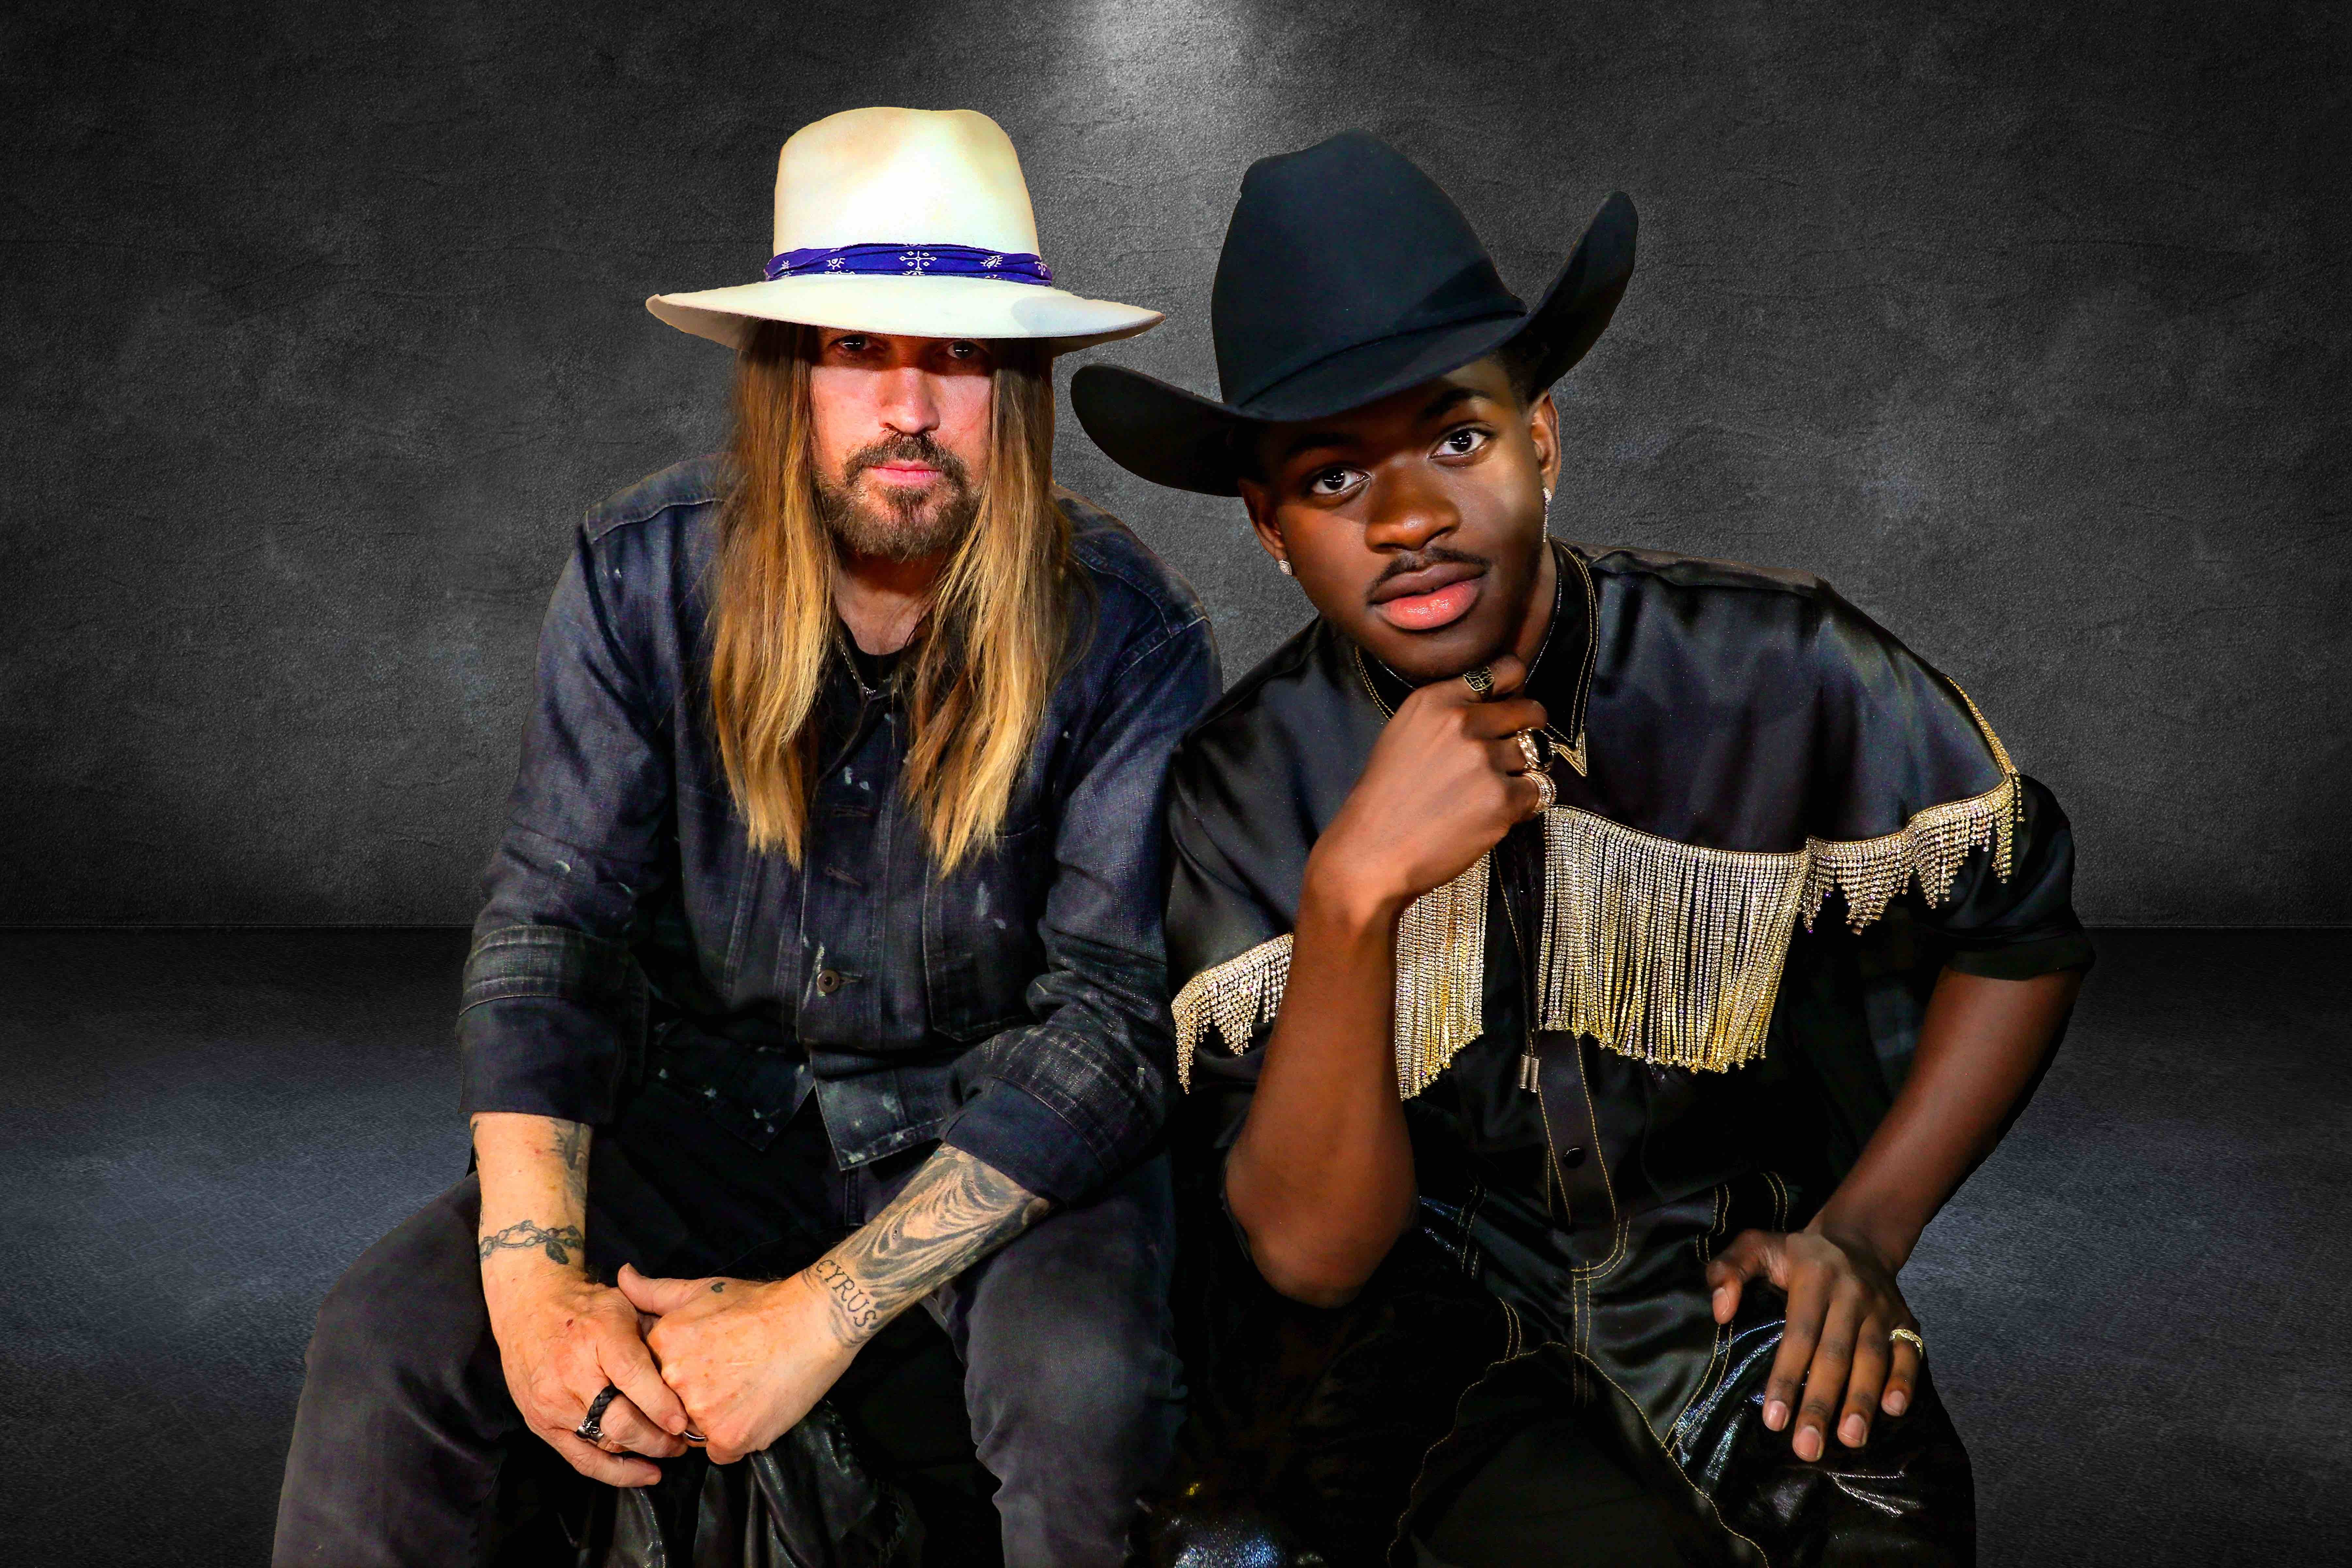 Billy cyrus old town. Billy ray Cyrus. Old Town Billy ray Cyrus. Lil nas x Billy ray Cyrus old Town Road.